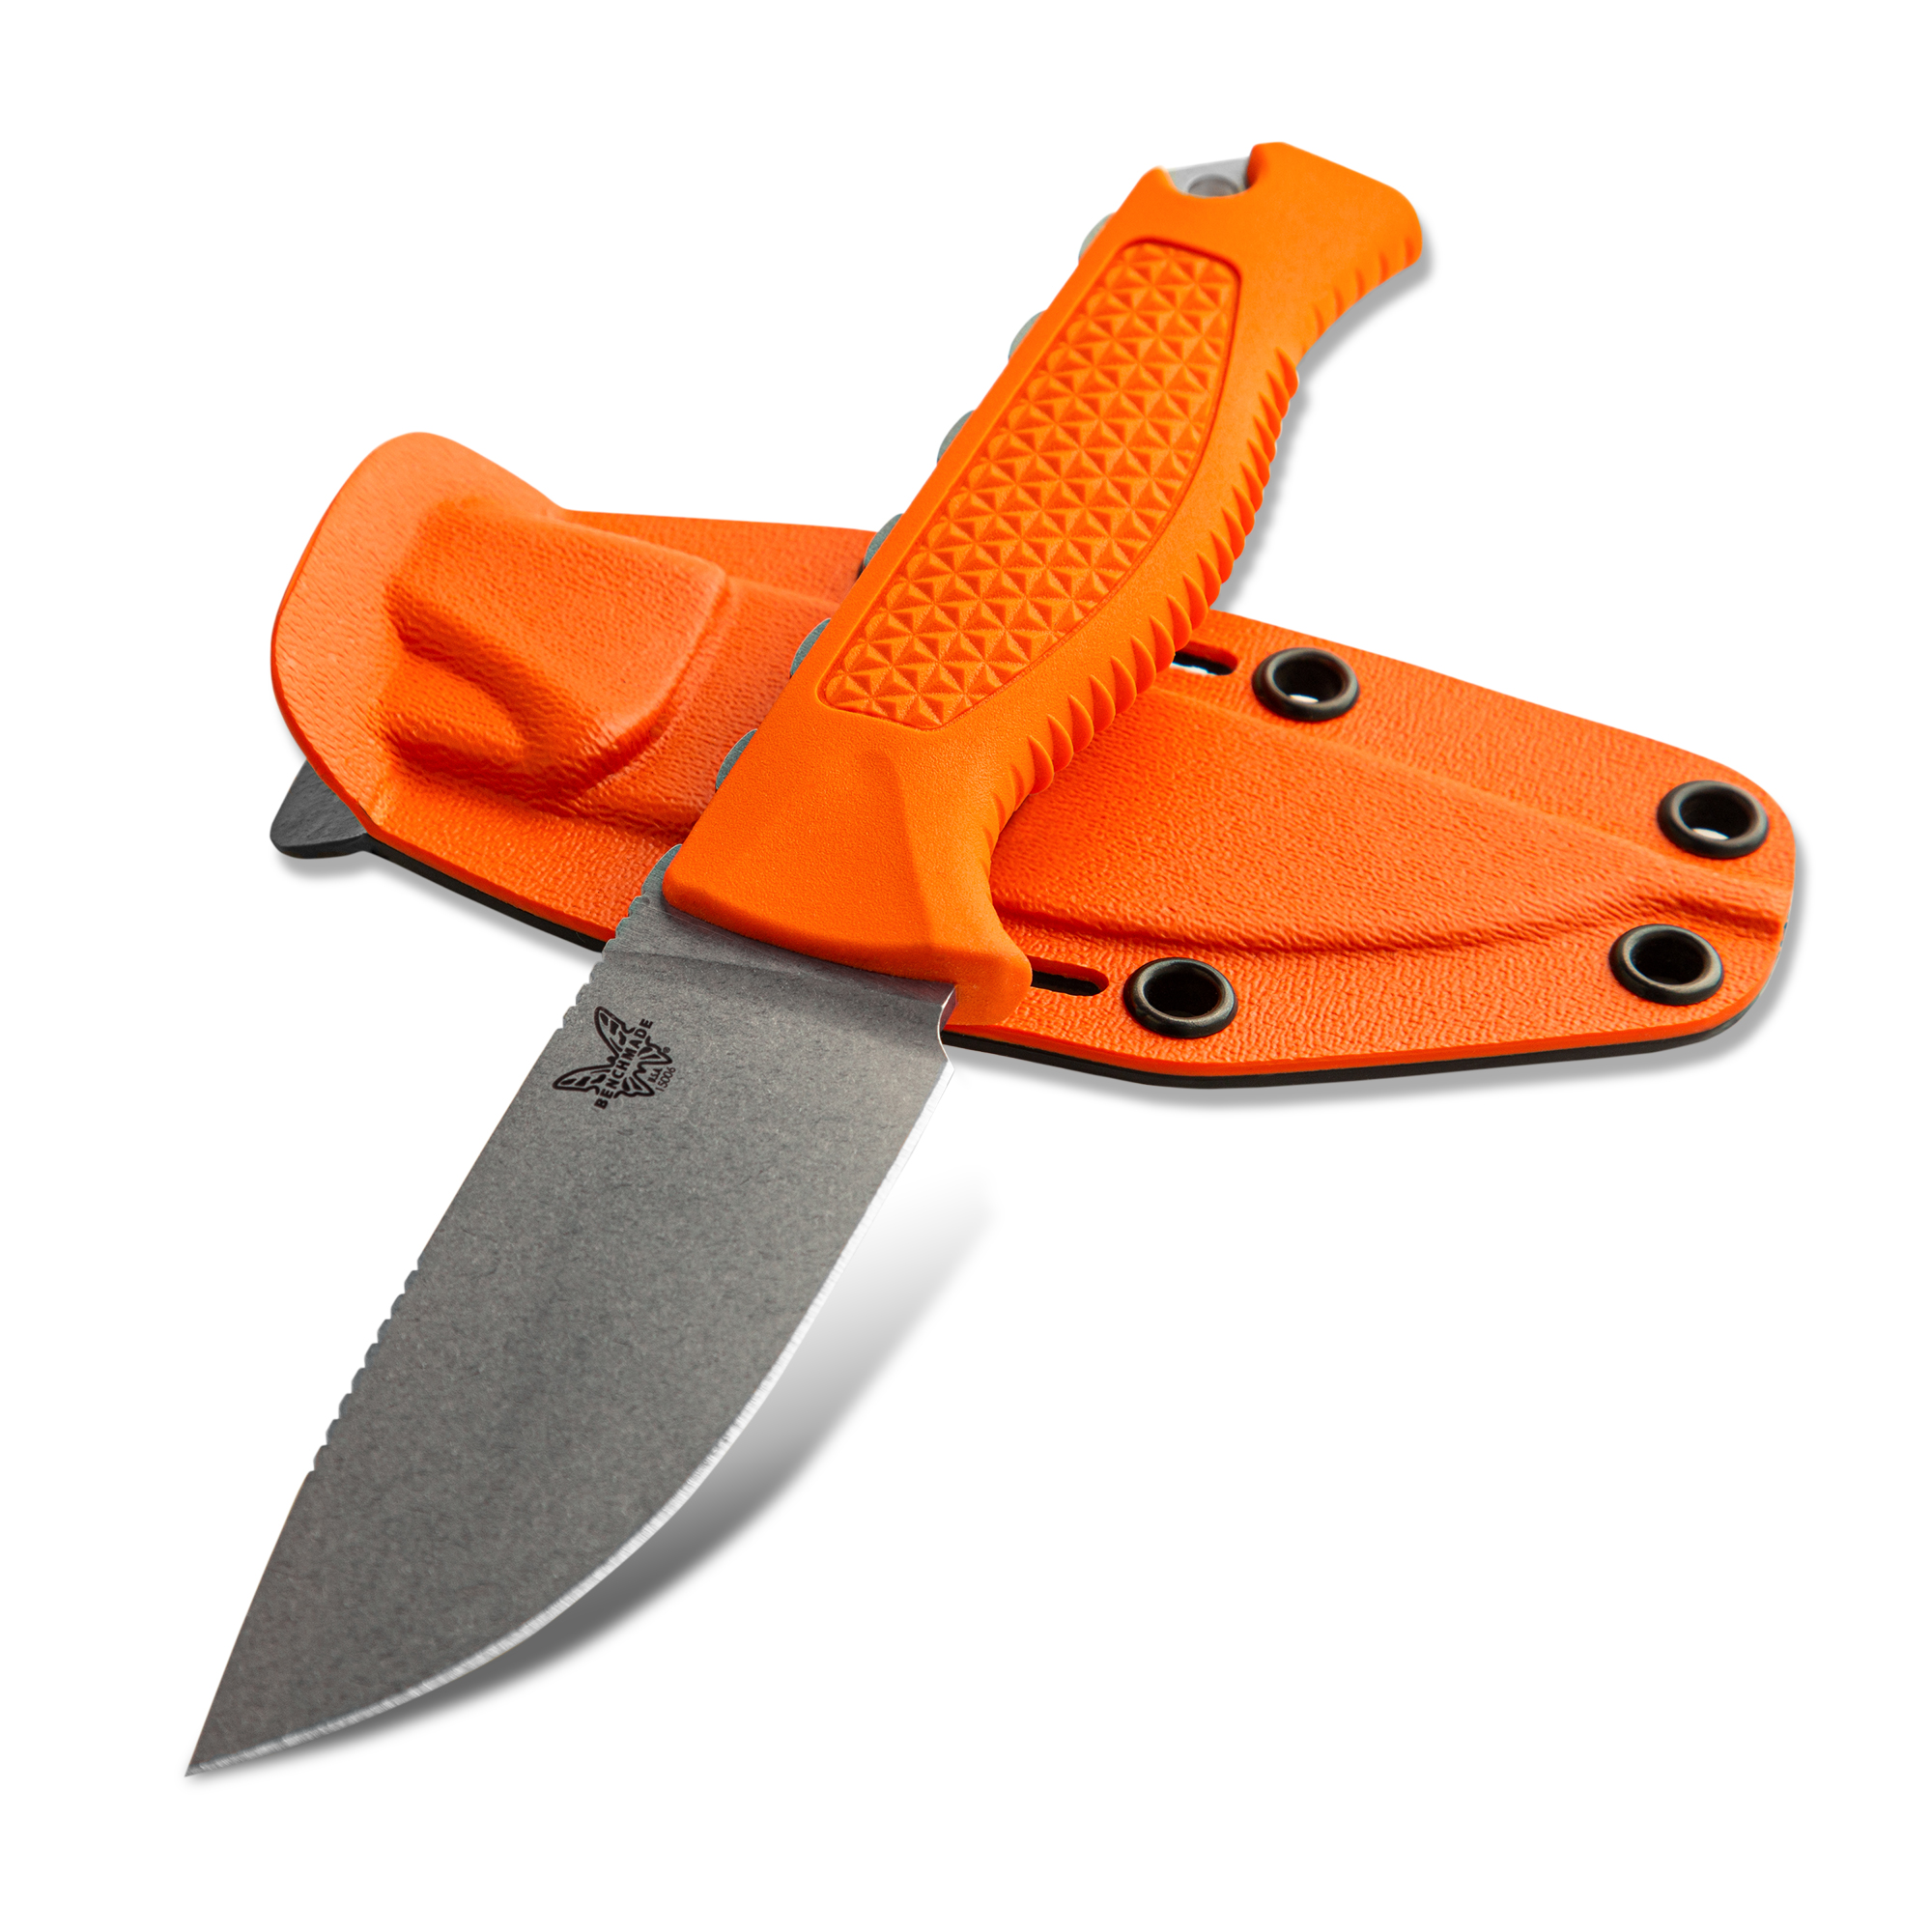 https://store.themeateater.com/on/demandware.static/-/Sites-meateater-master/default/dw853d6e44/benchmade-steep-country-knife/benchmade-steep-country-knife_global_primary.jpg